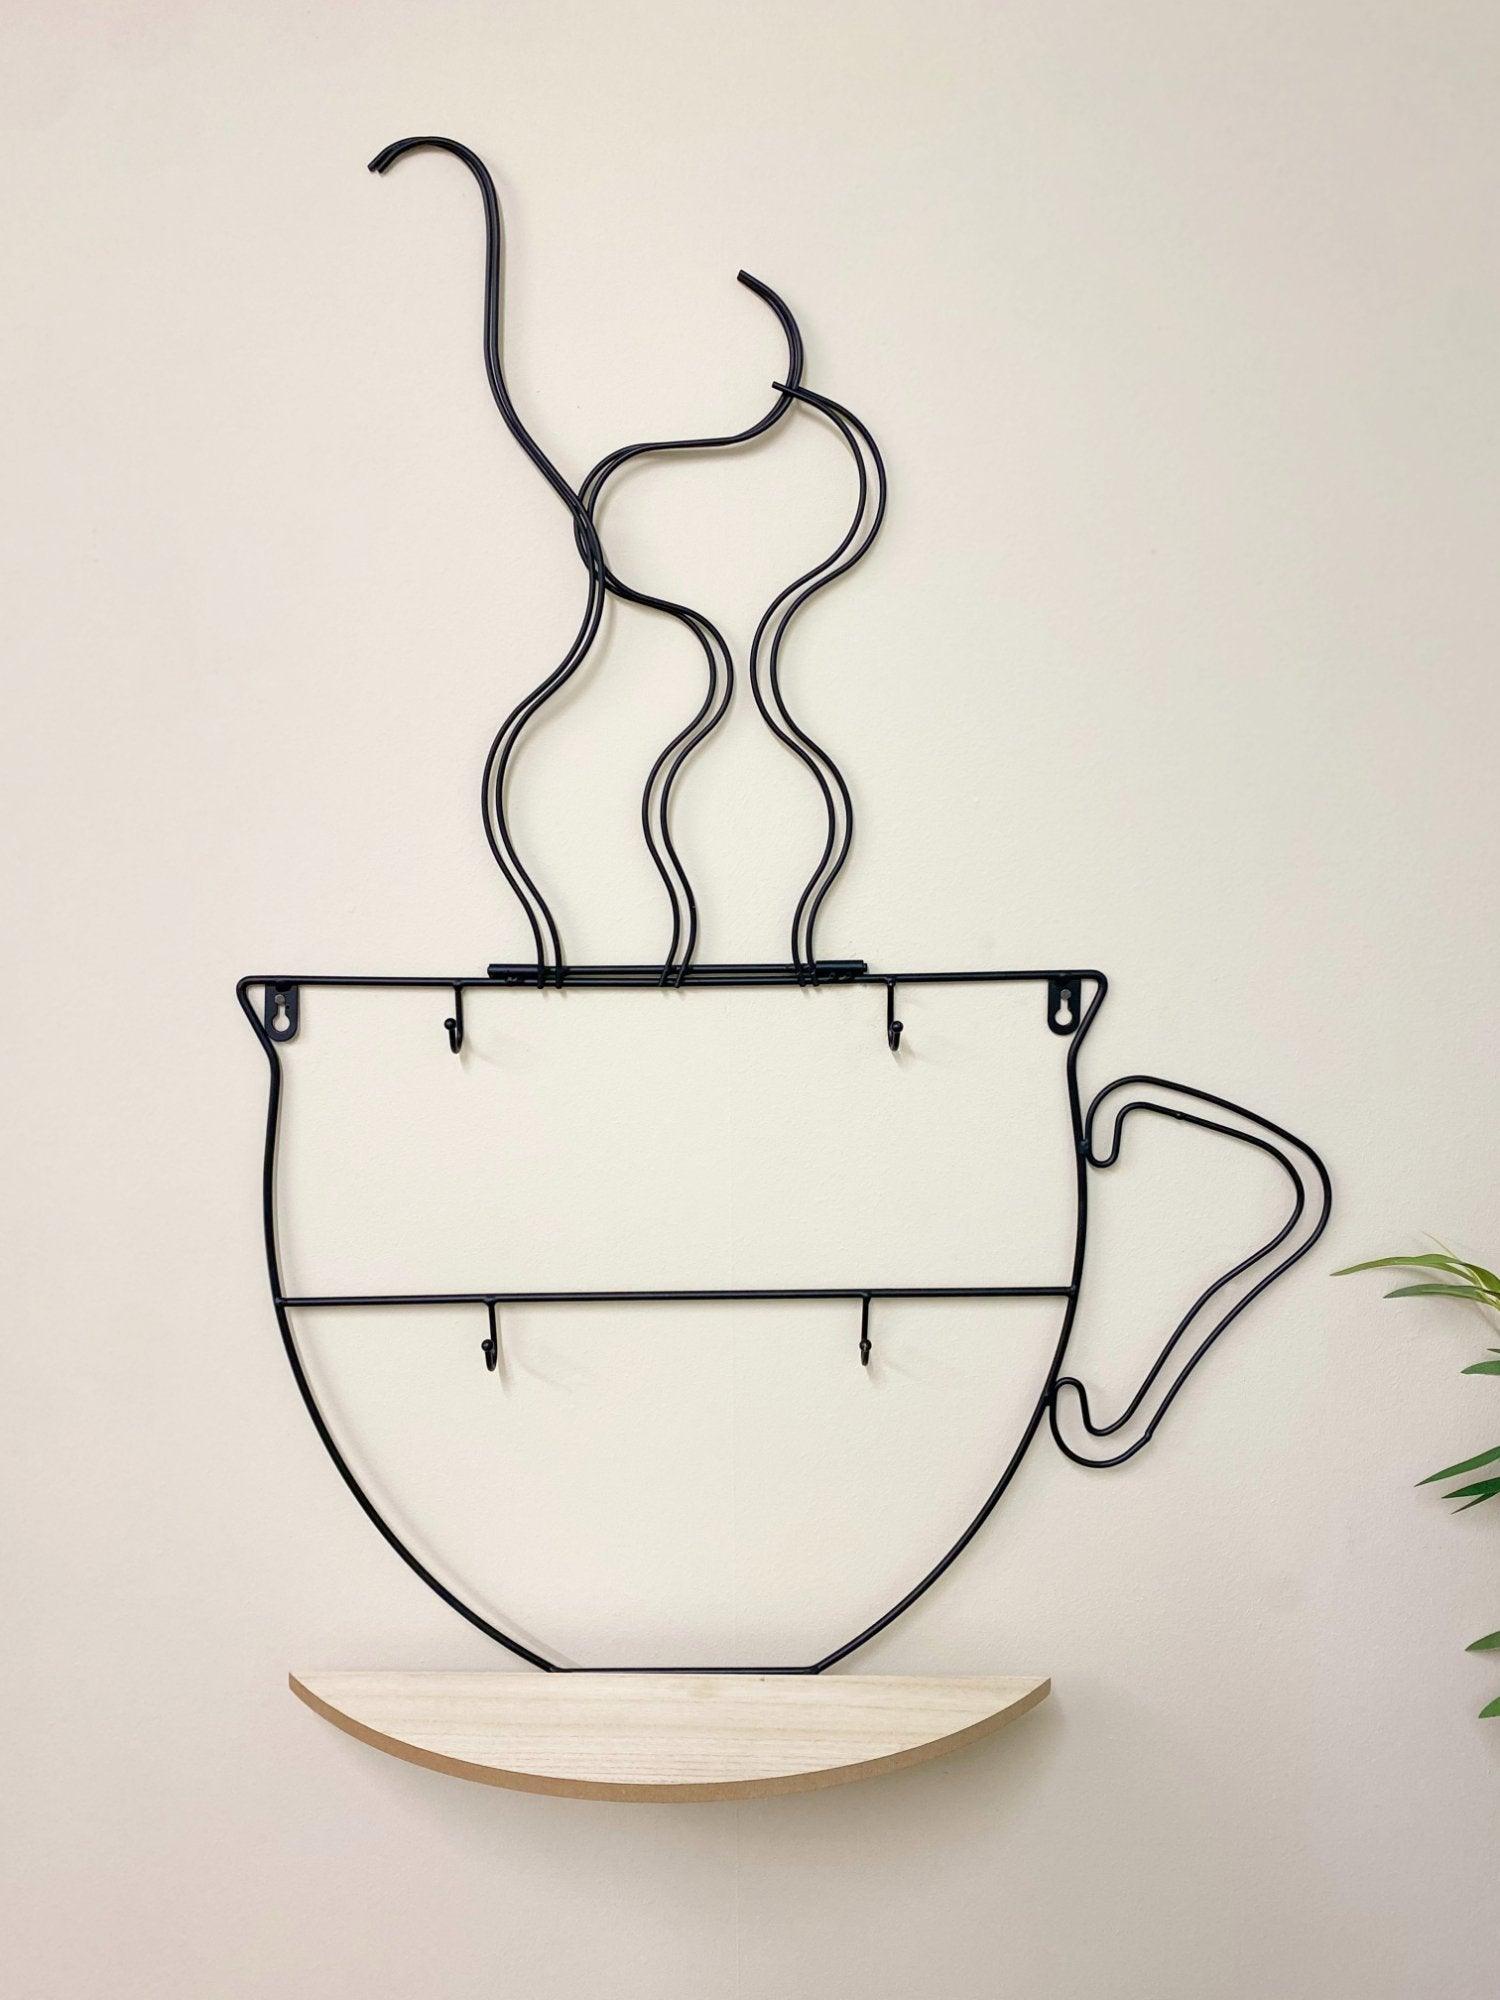 View Wall Mounted Wire Cup Hanger Wall Shelf information